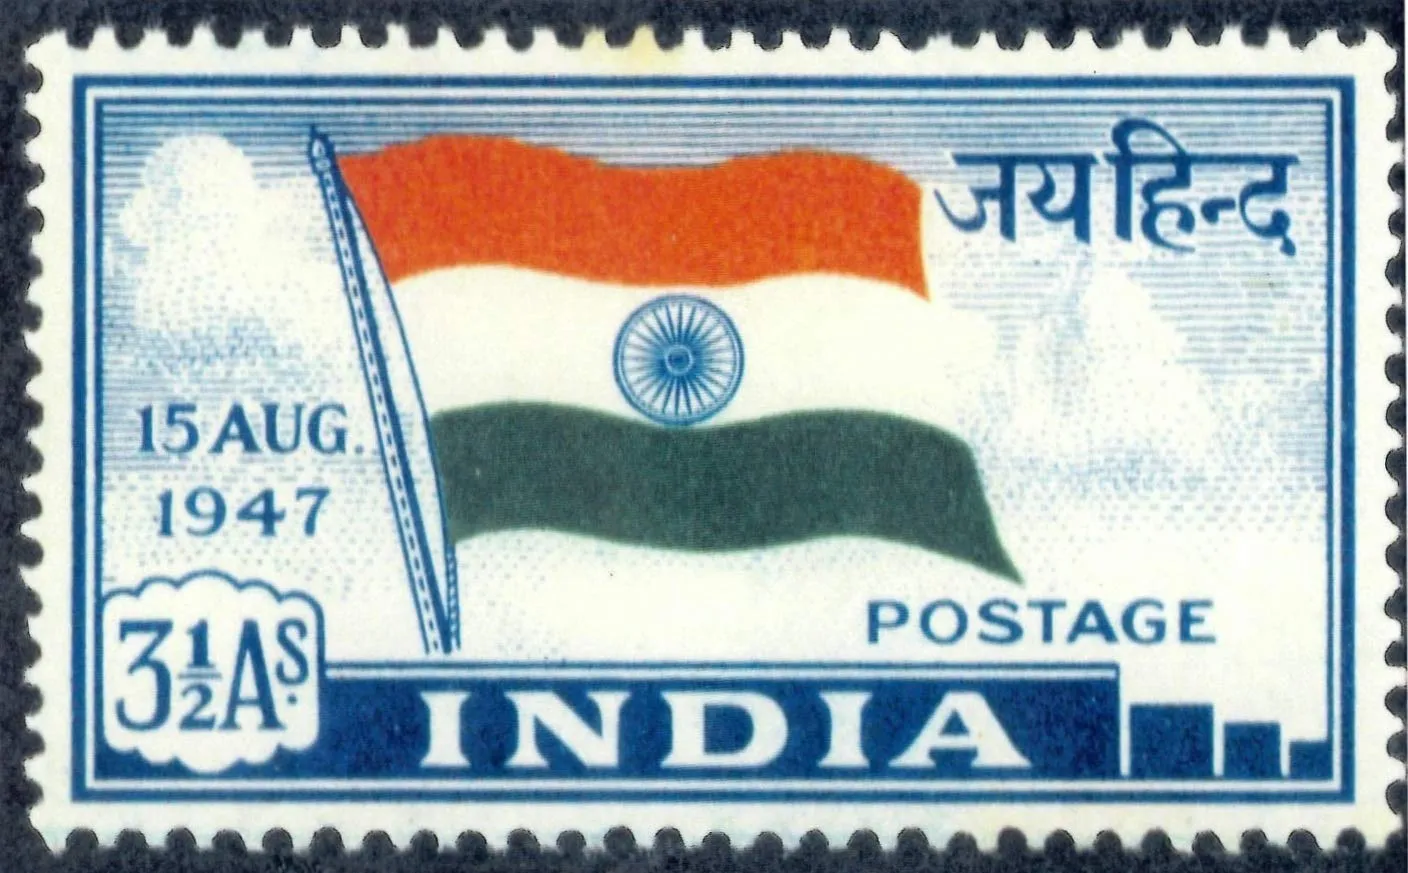 A posage stamp with Indian flag